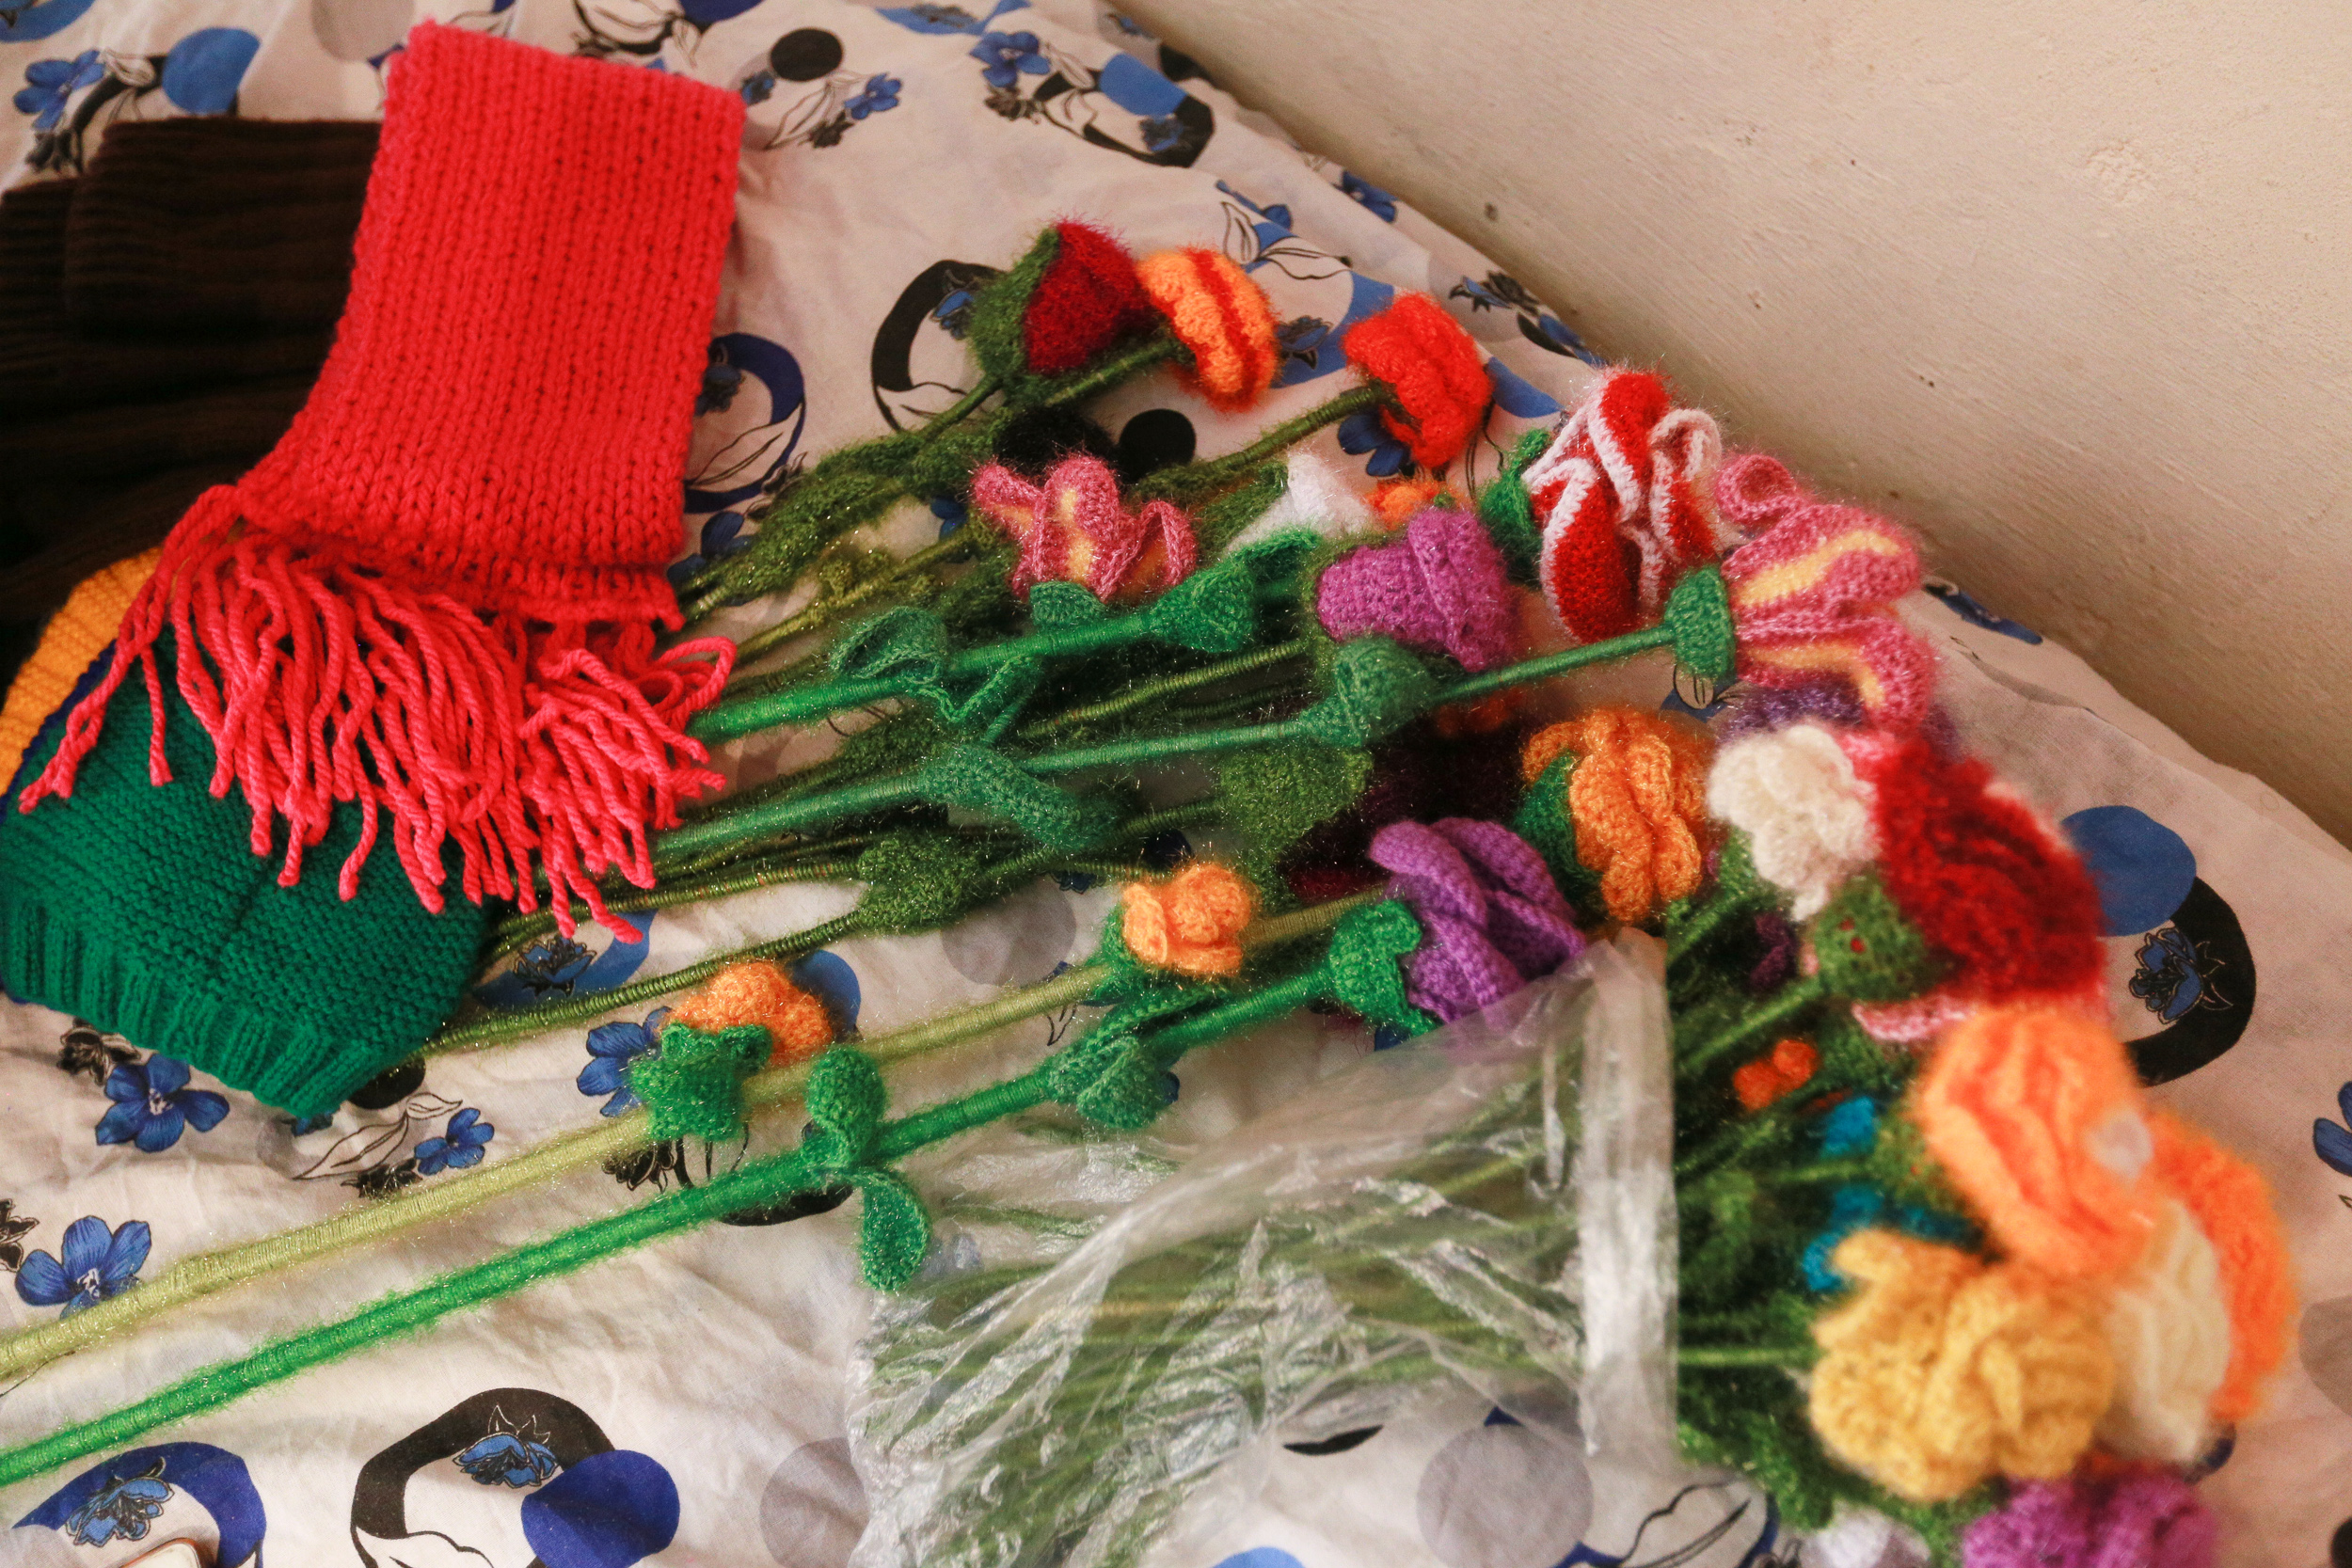 Elchin knits about 2 – 3 flowers per day